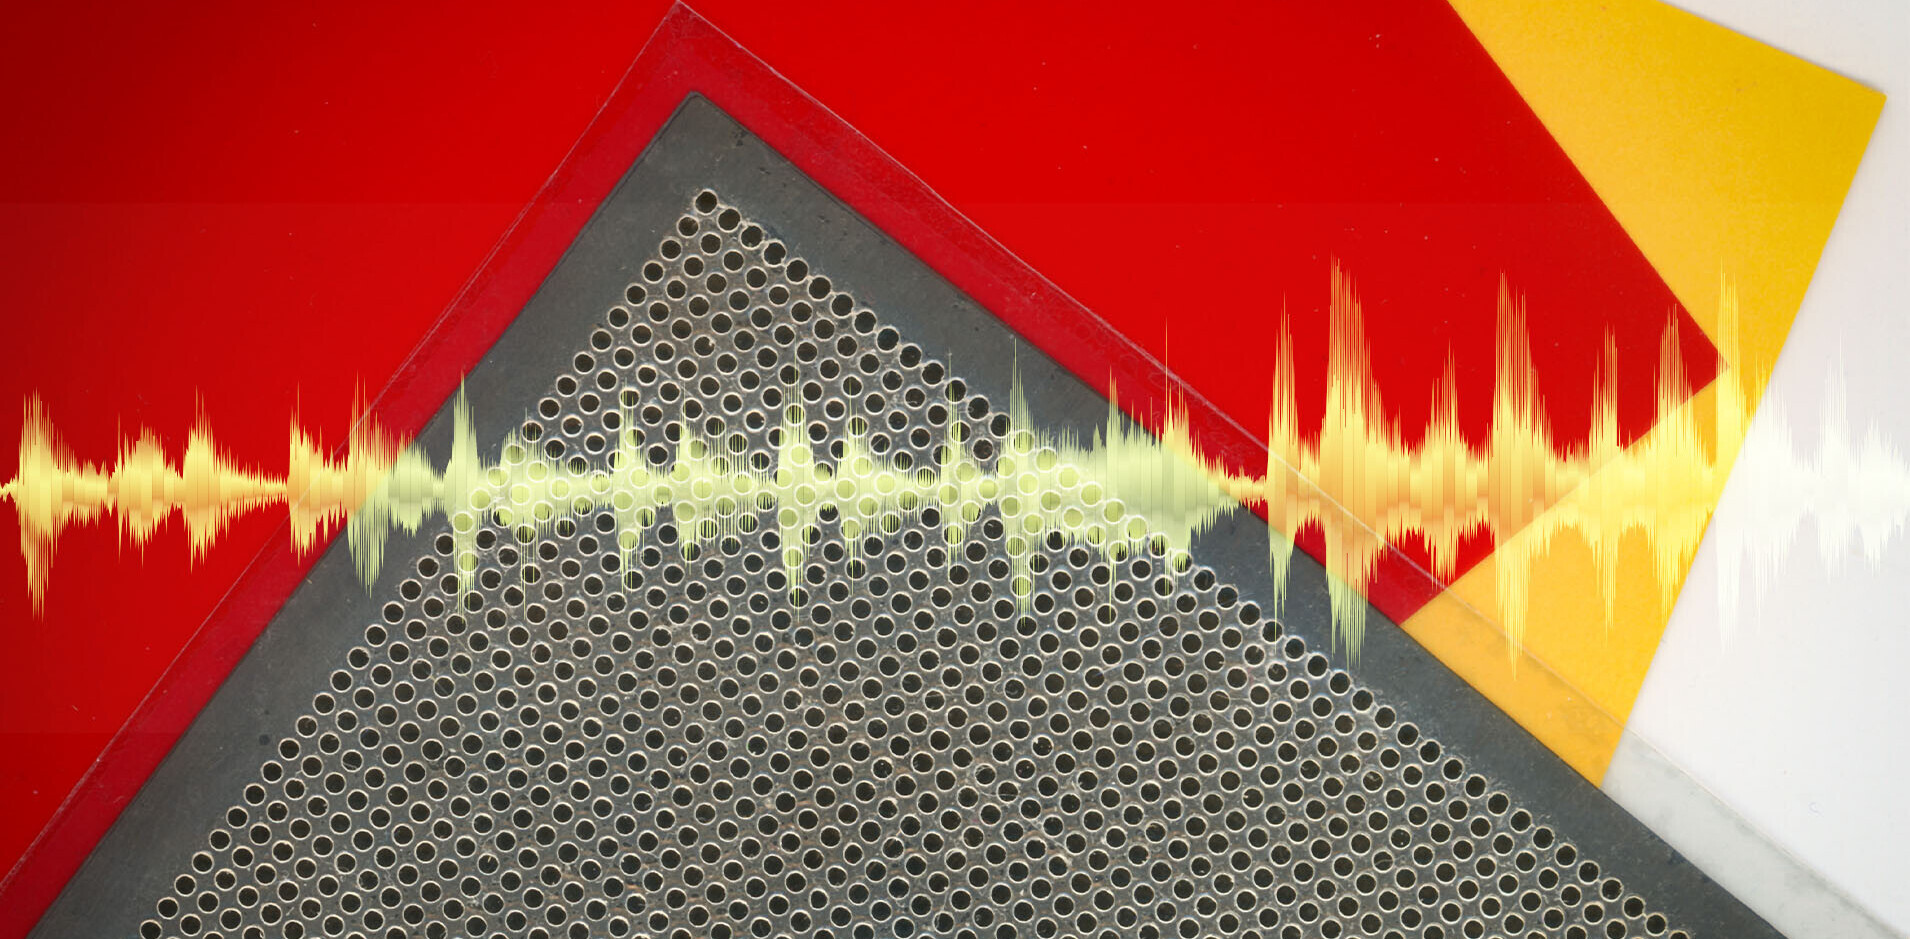 Scientists create paper-thin speakers that could be used like wallpaper